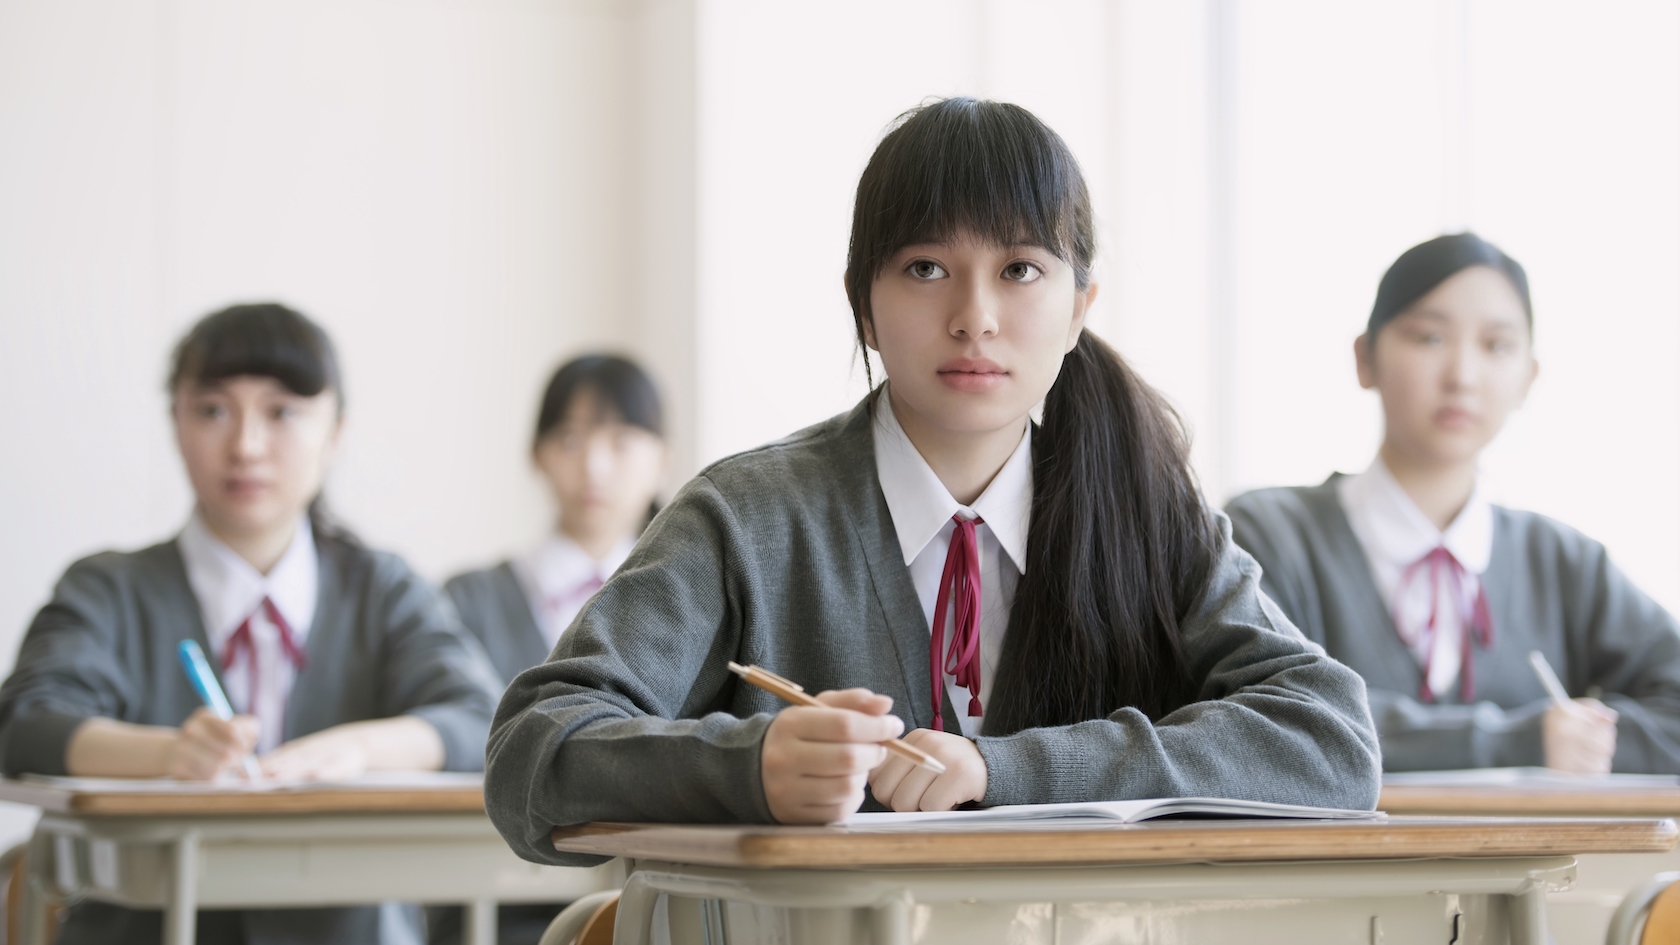 Adobe Stock 269132108. Japanese schoolgirls listening and taking notes in class.